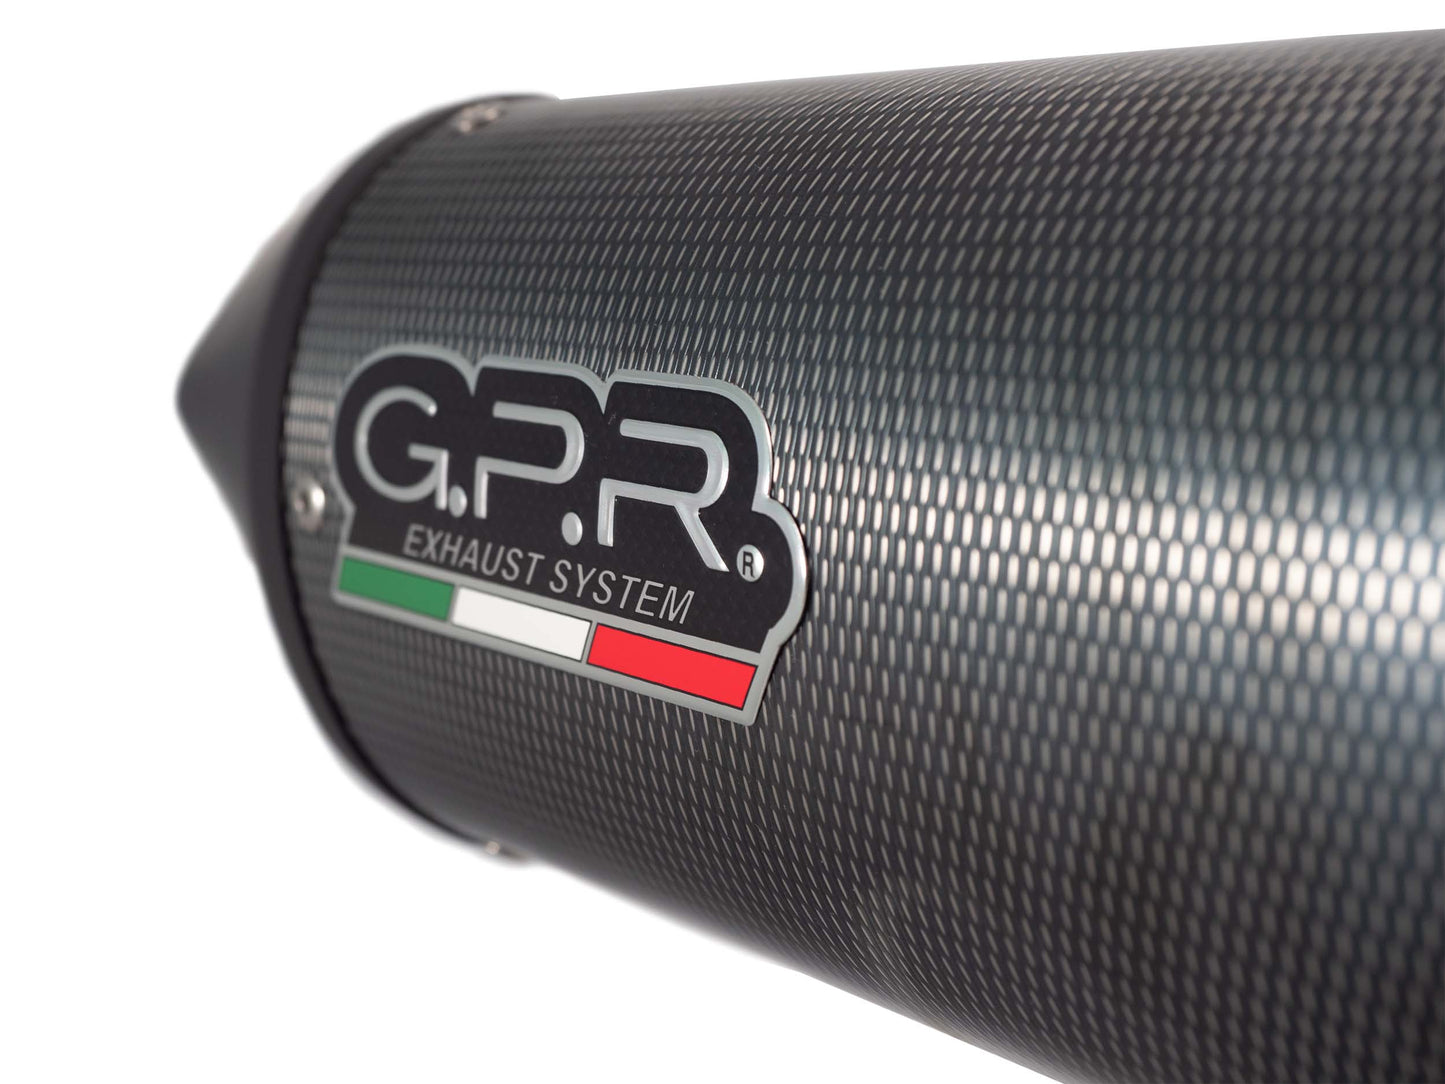 GPR Exhaust for Bmw R1200GS - Adventure 2013-2013, Furore Poppy, Full System Exhaust, Including Removable DB Killer